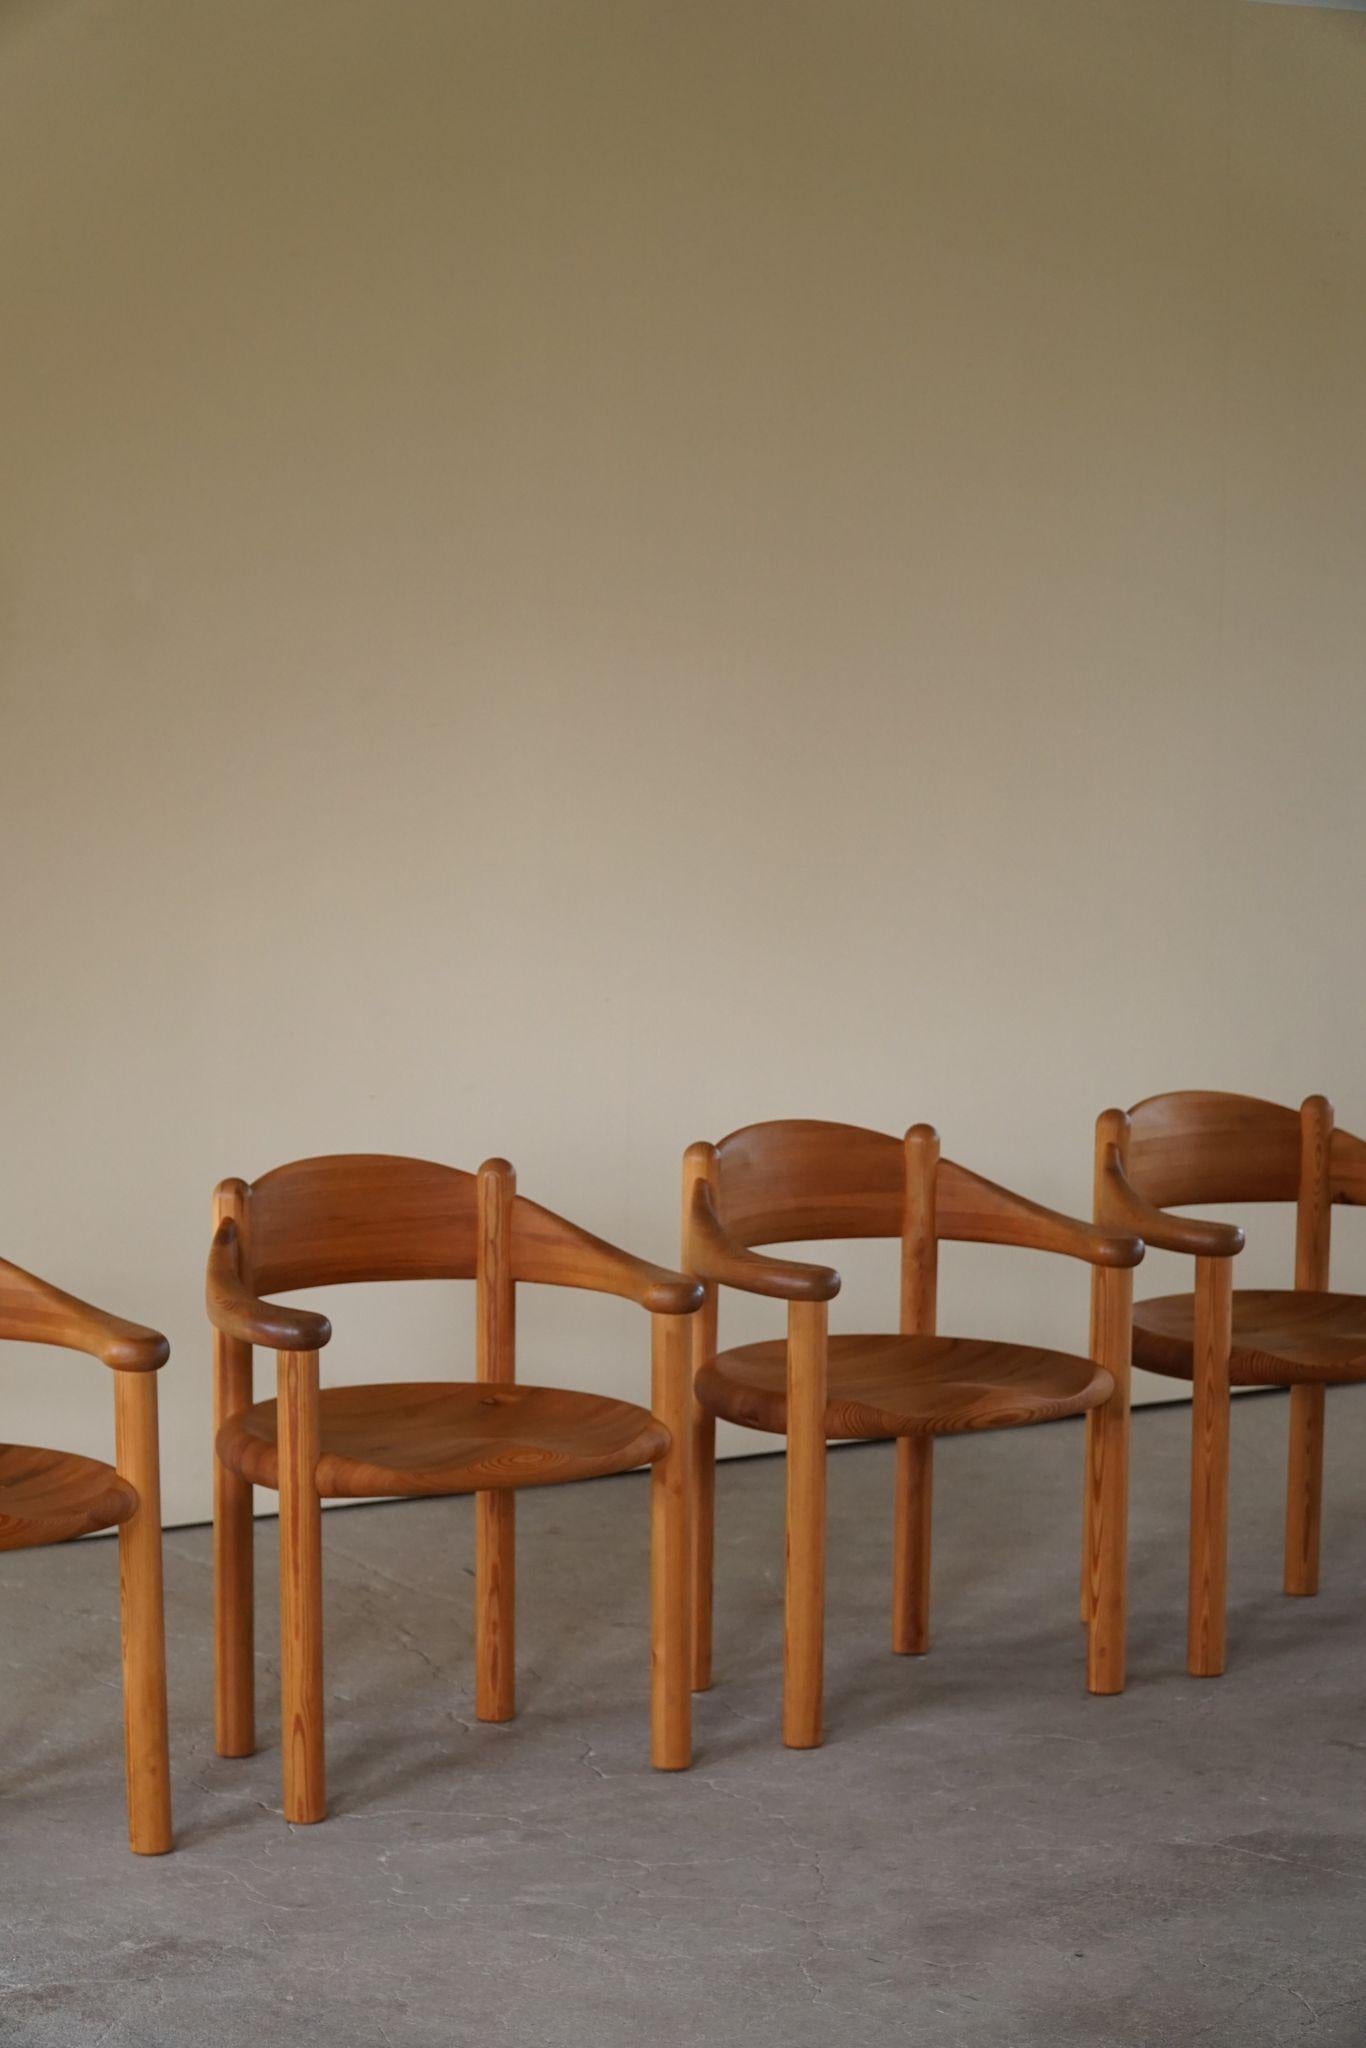 Set of 6 dining / armchairs in solid pine. Designed by Rainer Daumiller for Hirtshals Sawmill in 1970s, Denmark. This set is in a great vintage condition with a lovely patina.

A fine mid century brutalist set that pair well with many types of